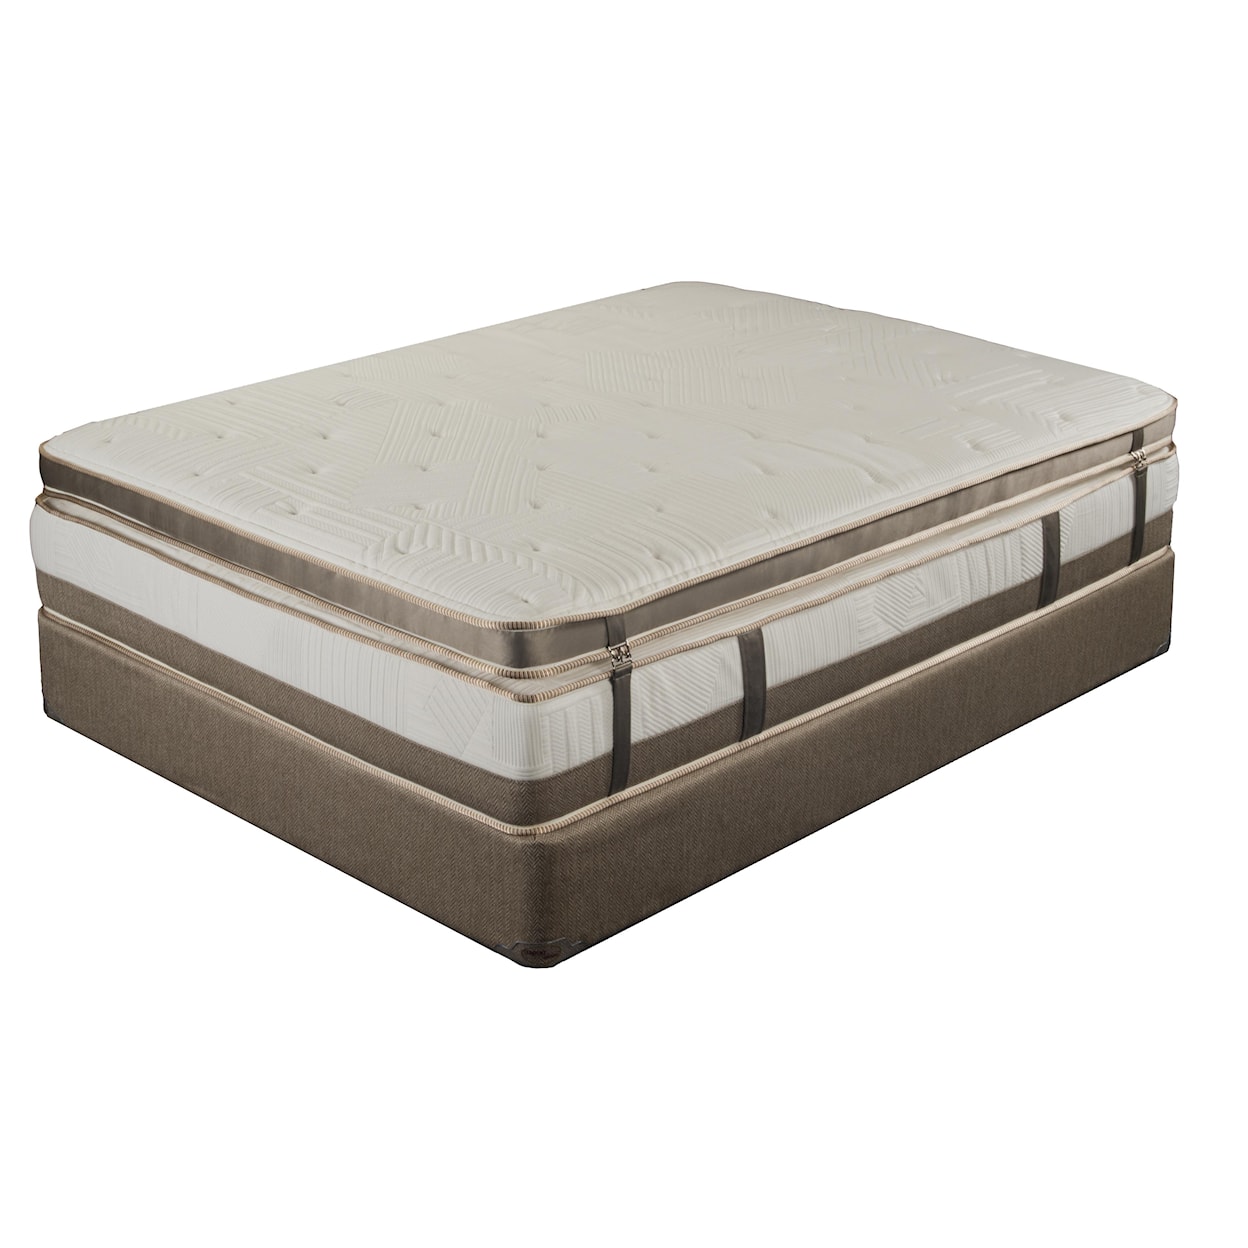 King Koil Extended Life 3300 Twin Mattress with Removable Top Layer 